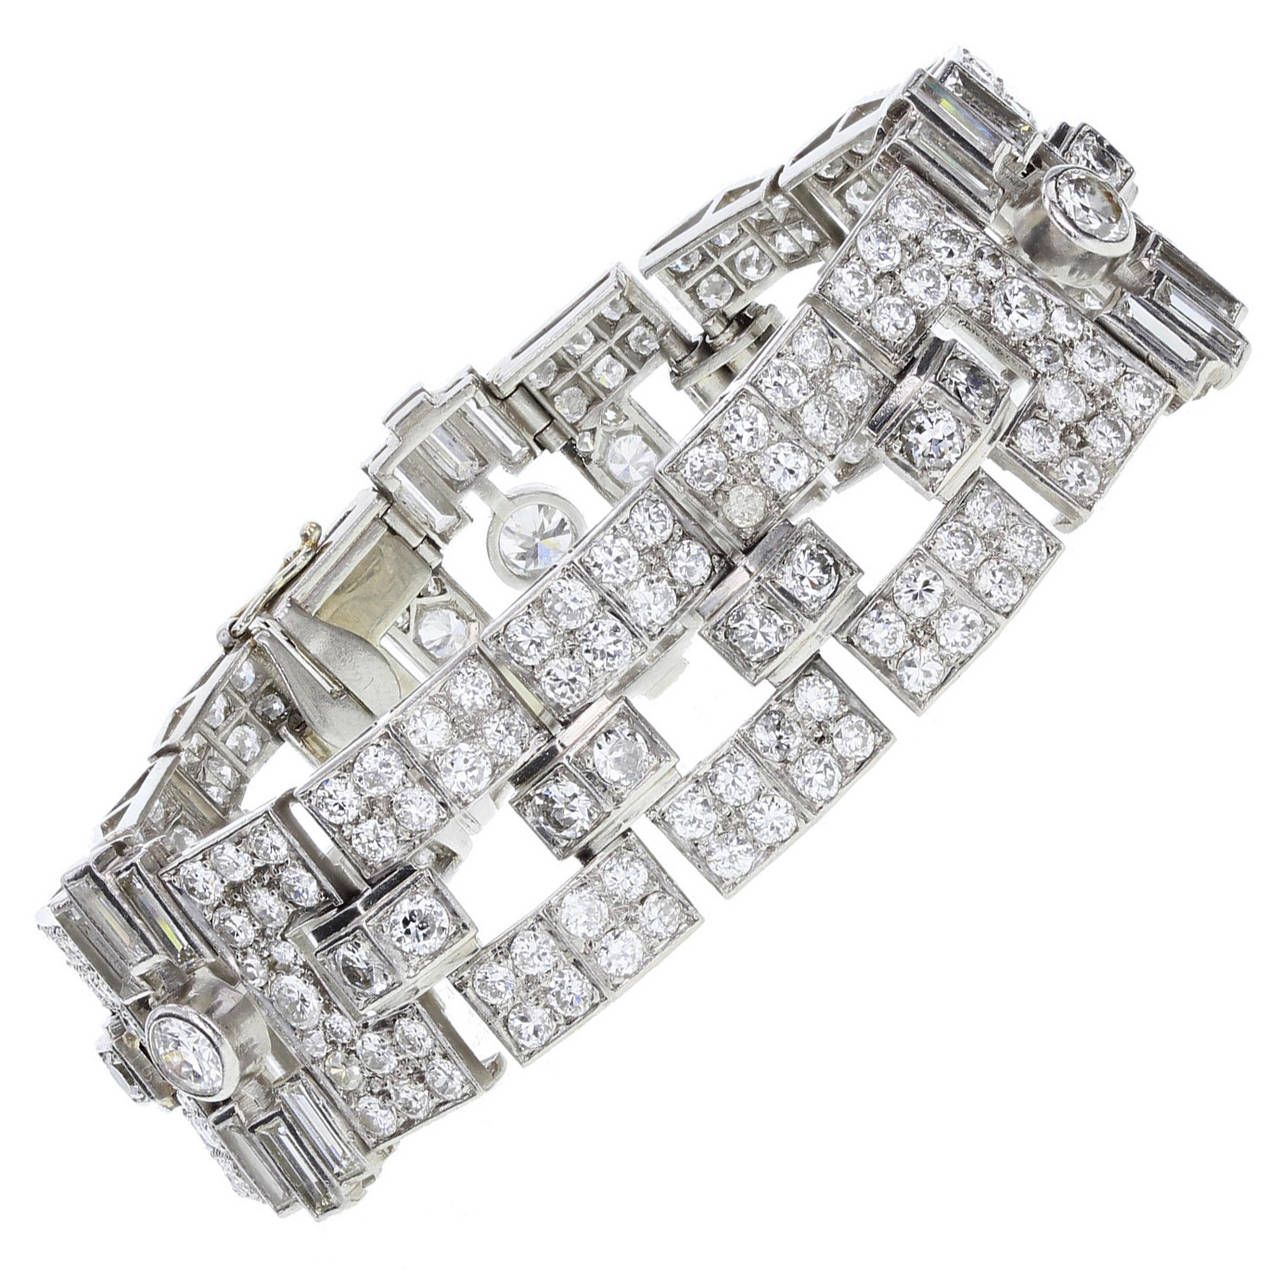 Single-cut and old European-cut diamonds pave set in platinum in this fantastic 1930s Art Deco bracelet. Three panels set with a single rubover set old-cut diamond to the centre, surrounded by baguette and single cuts. Each panel linked with three